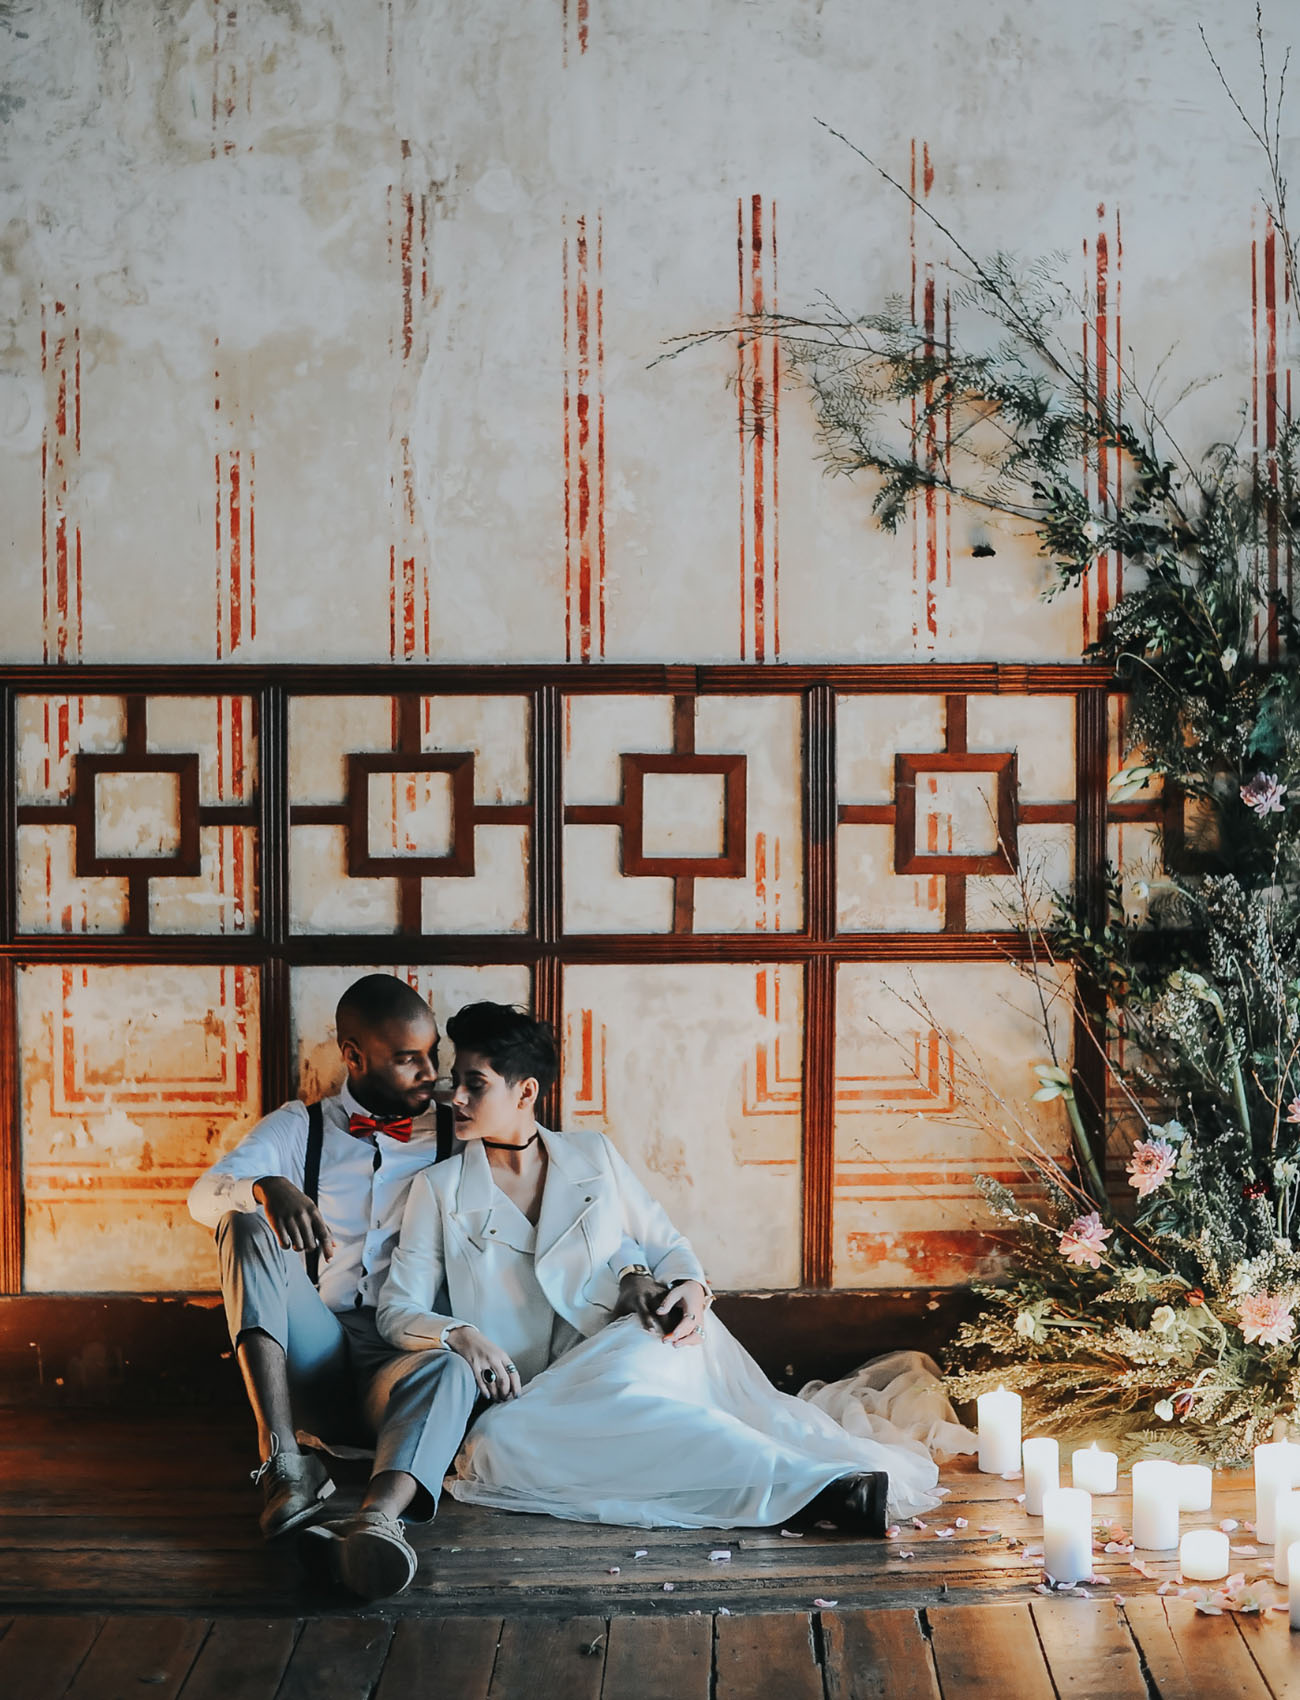 This edgy wedding shoot took place in Portugal, and it's full of gorgeous a bit rough but chic details, which ideal for a couple who wants something different